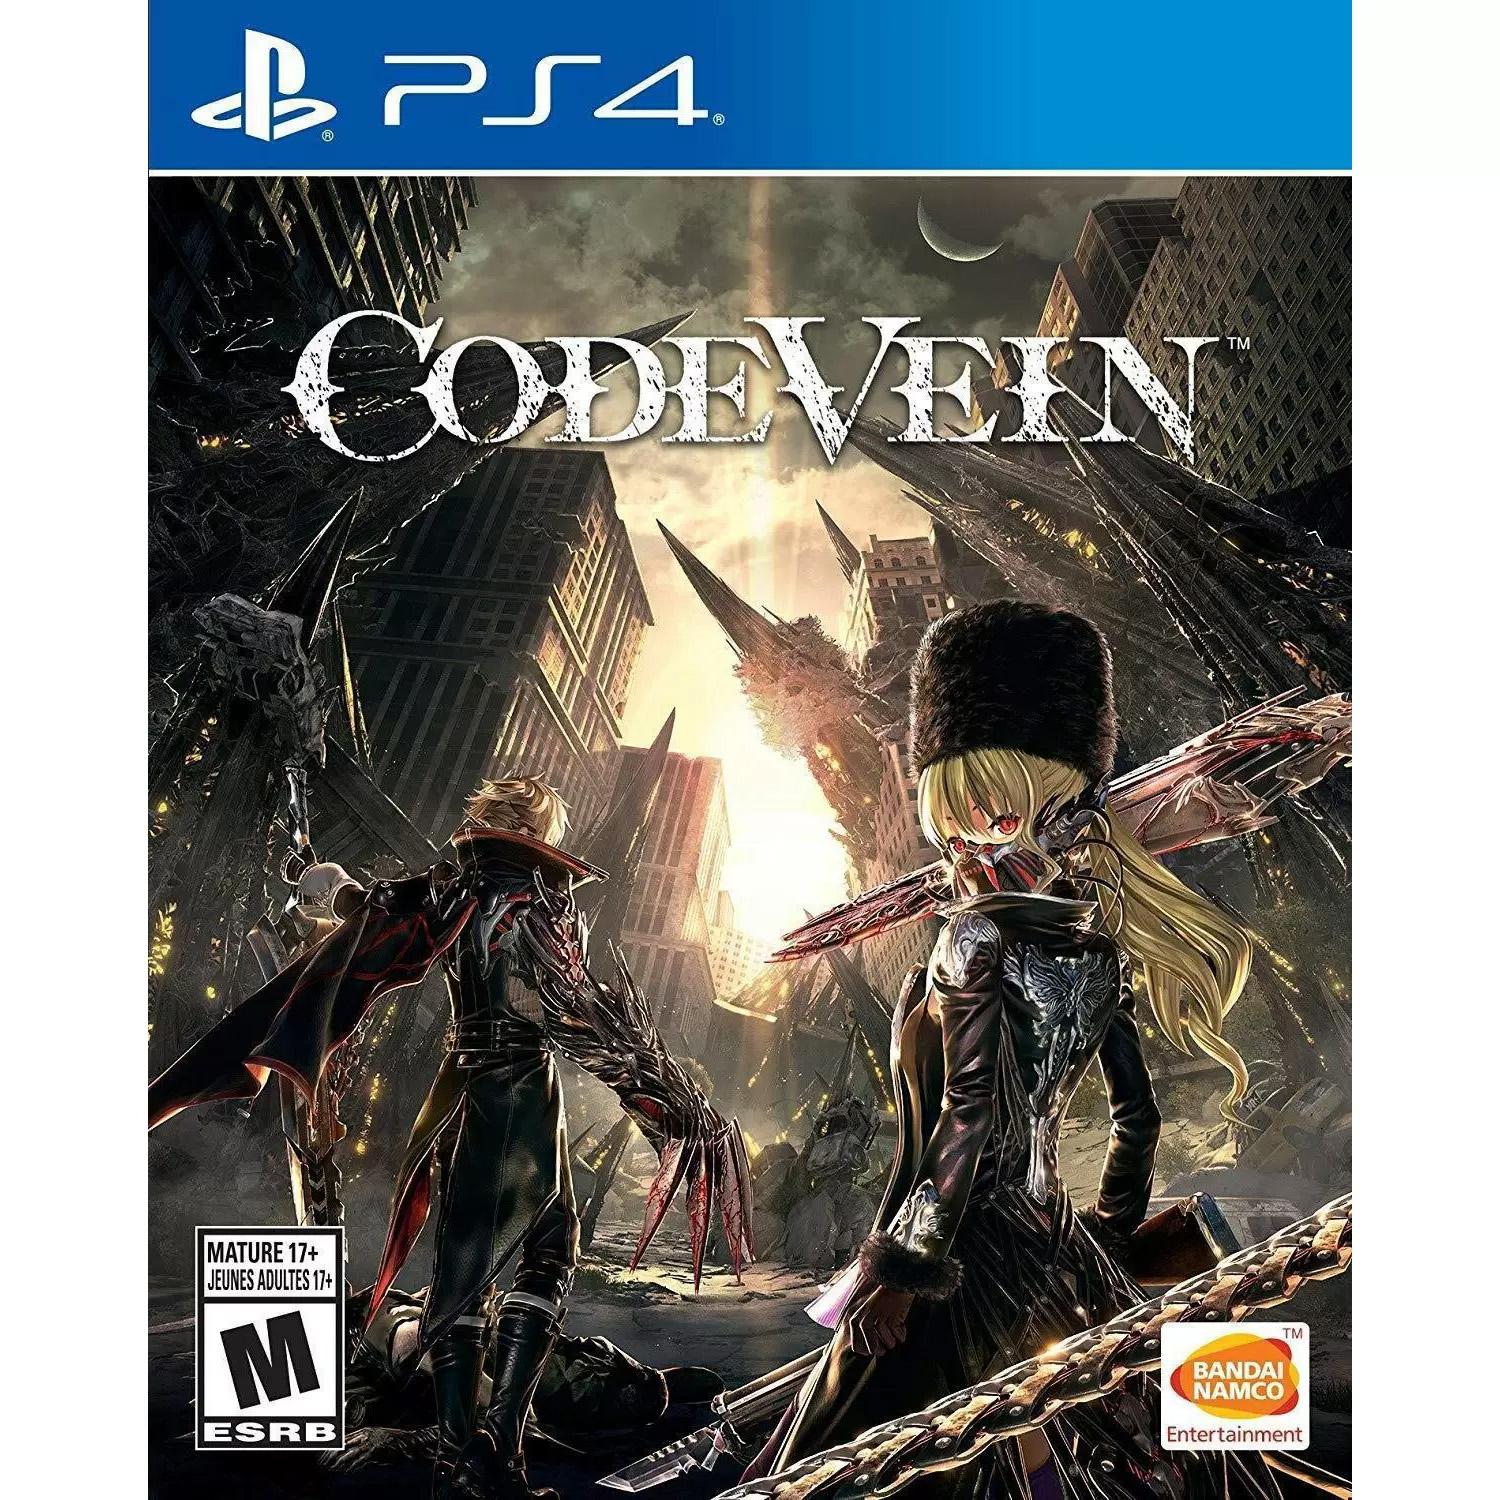 Code Vein for PS4 for $14.99